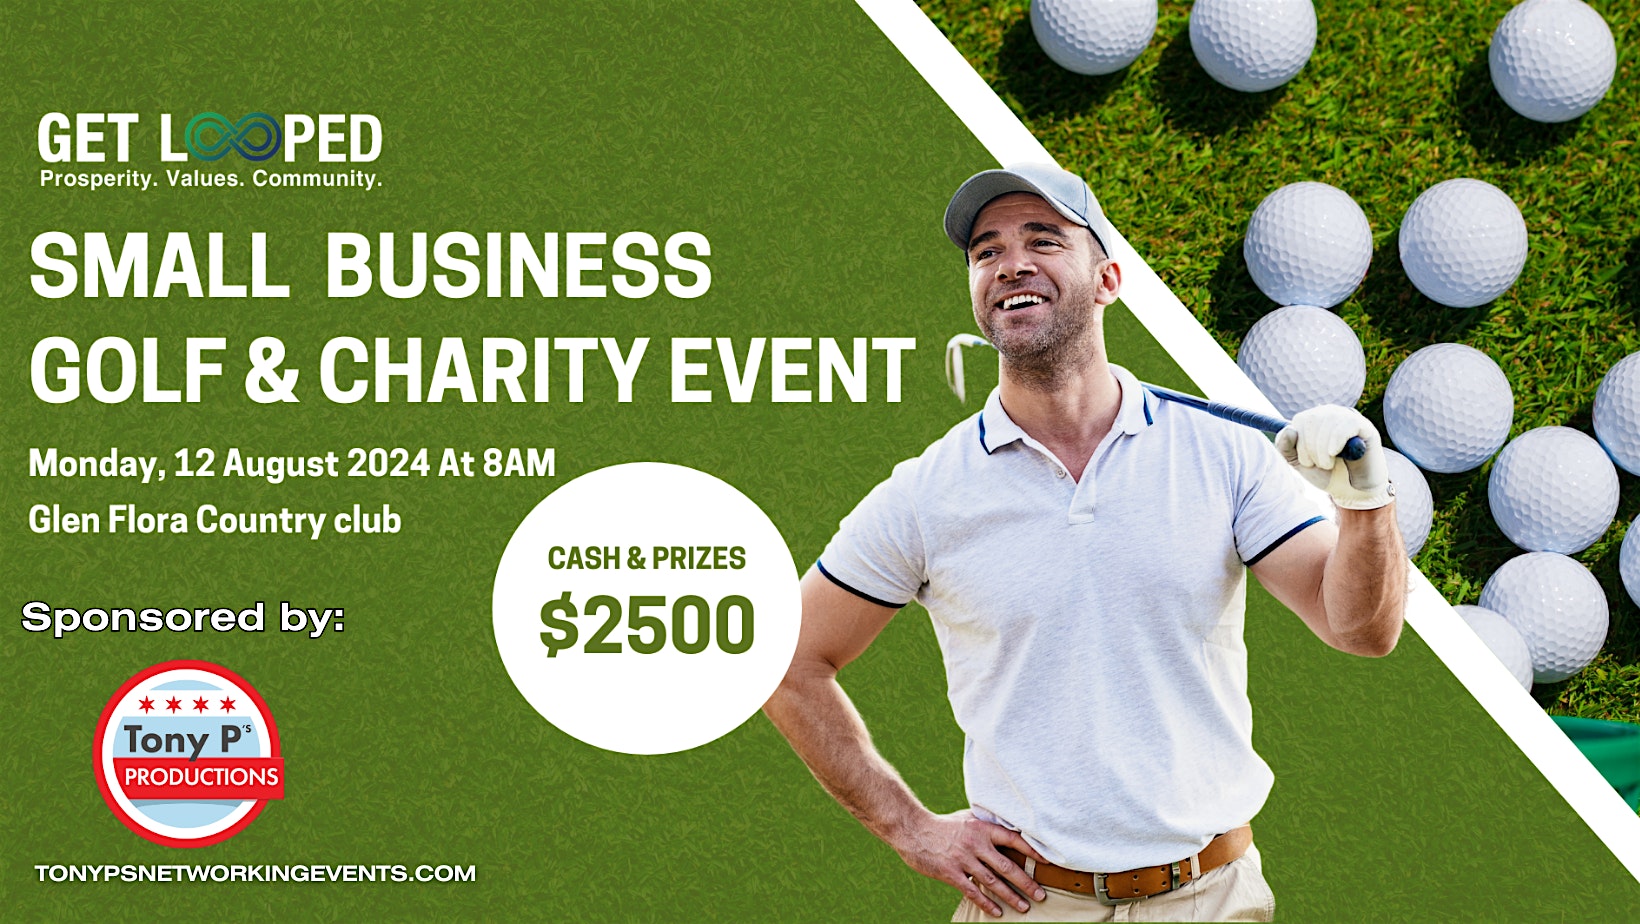 GET LOOPED INTO OUR UPCOMING GOLFING EVENT.